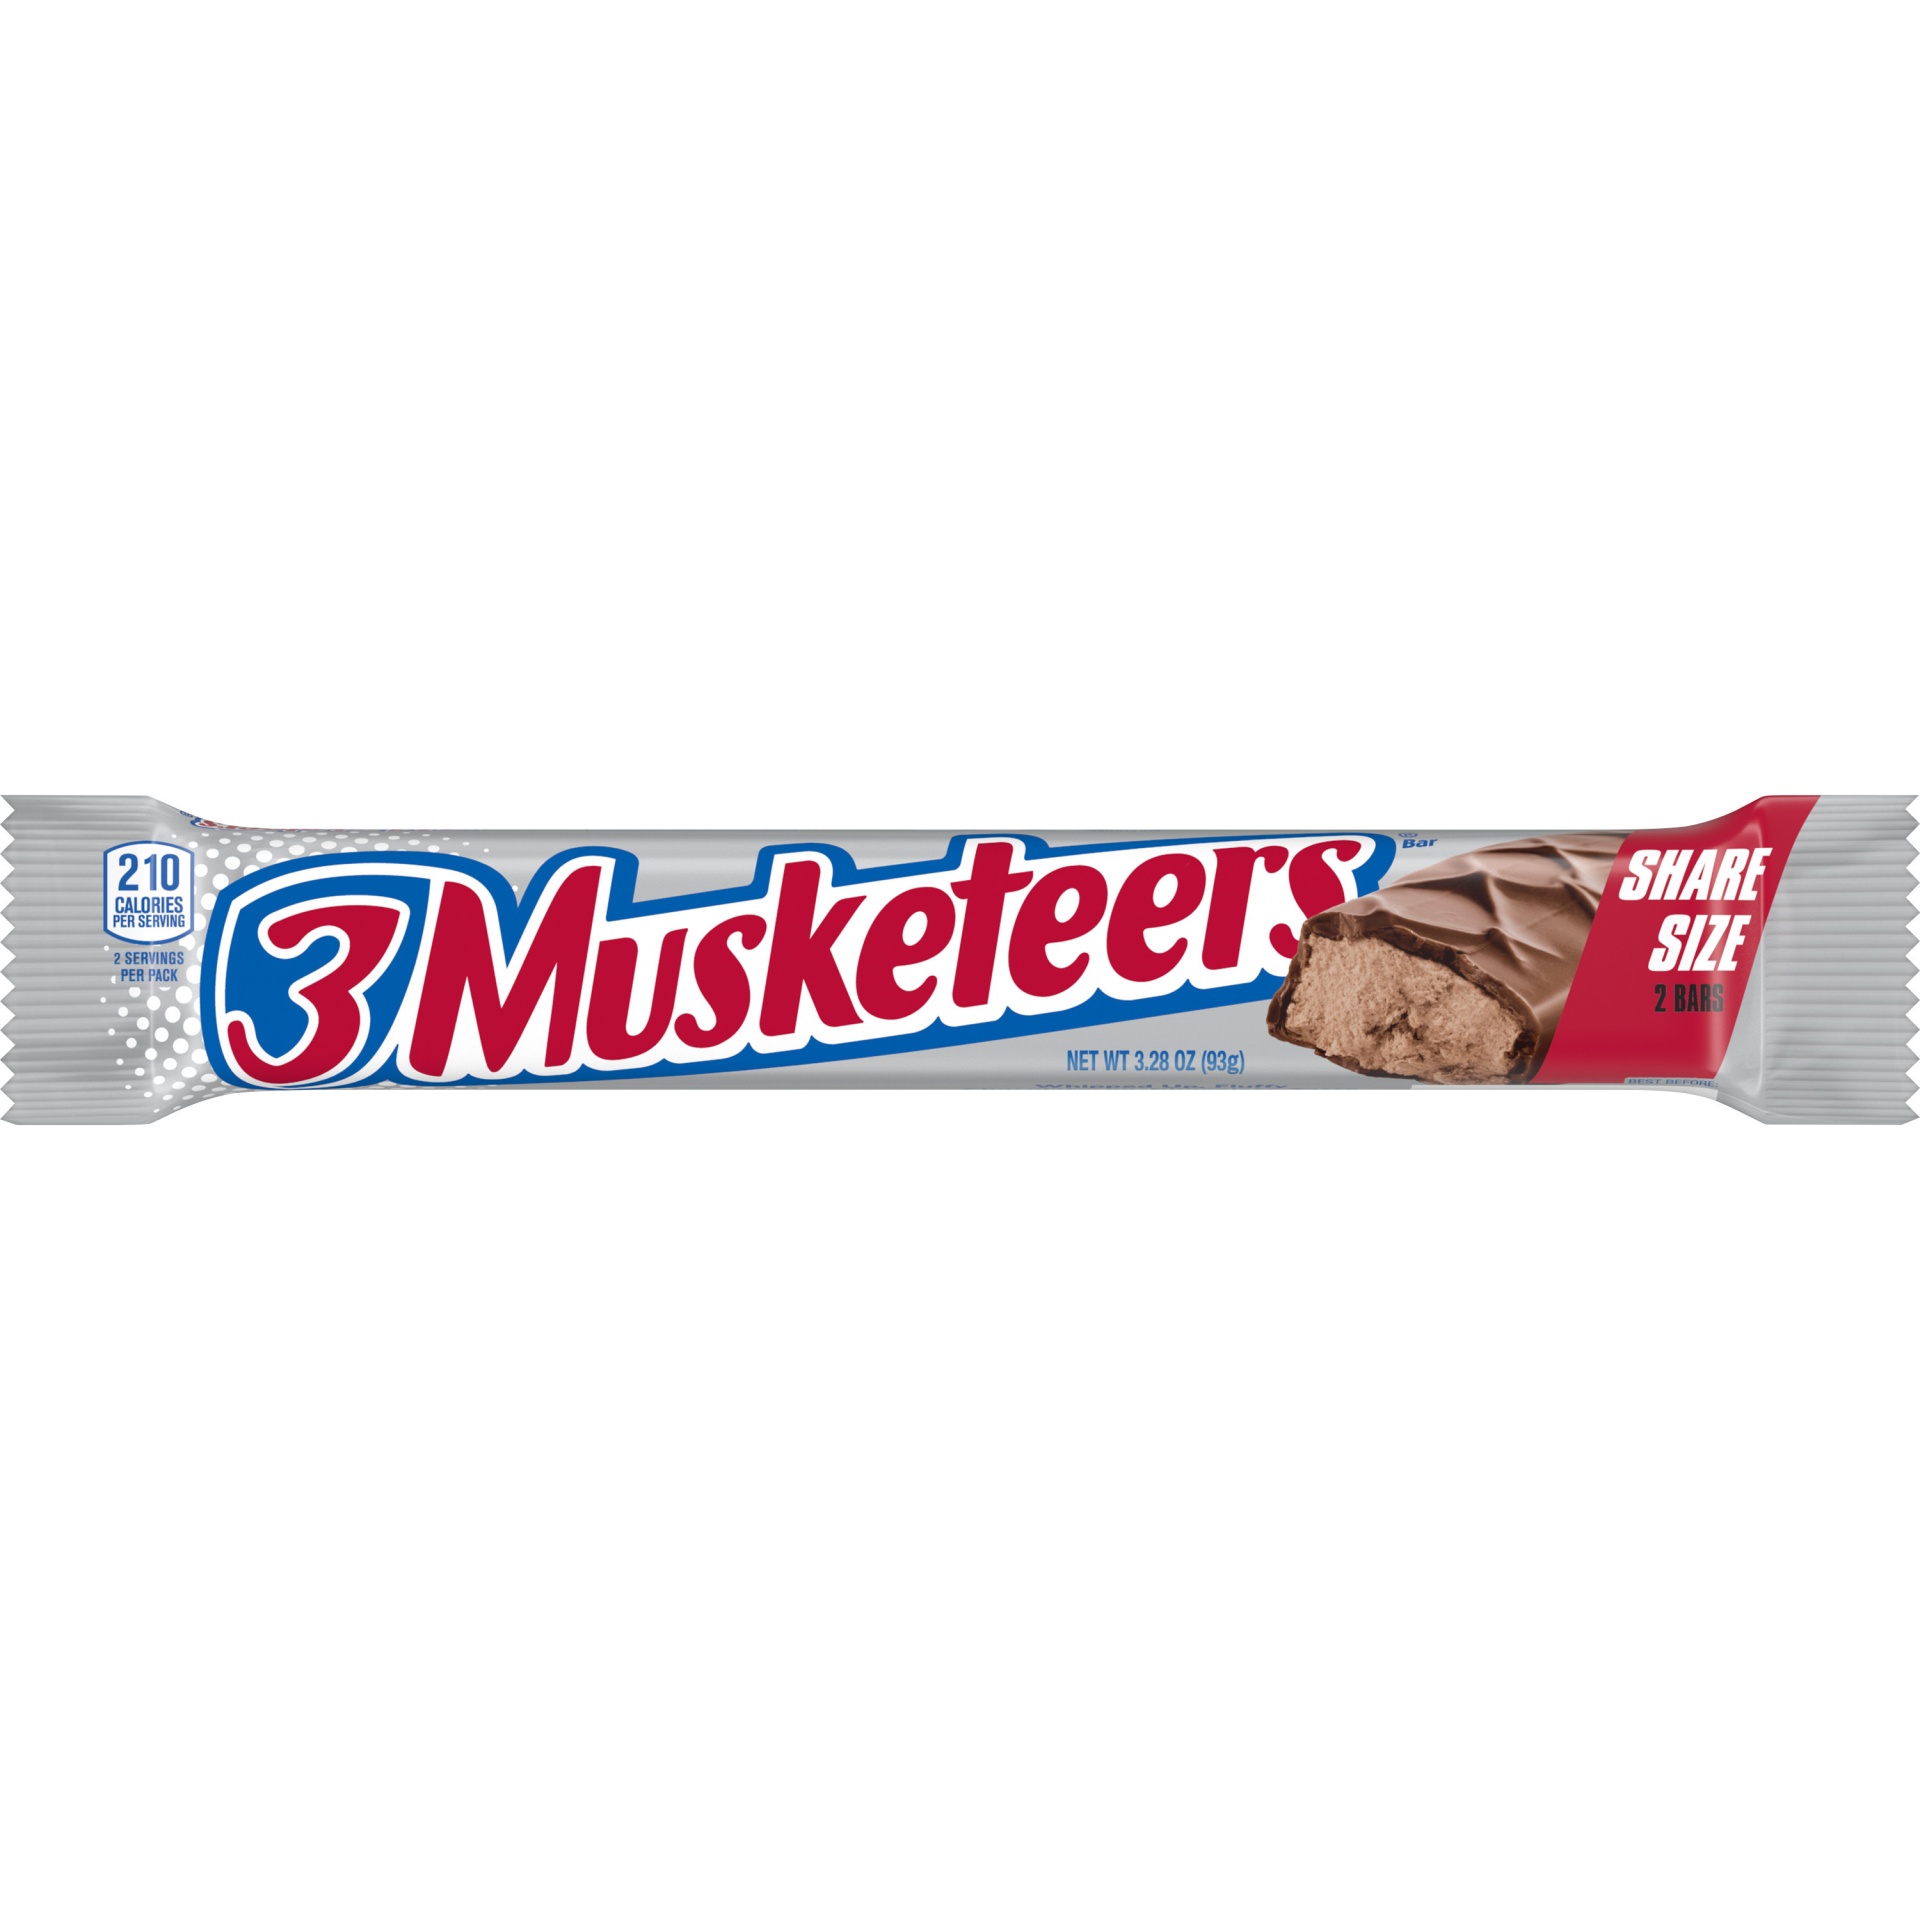 slide 1 of 1, 3 MUSKETEERS Chocolate Sharing Size Candy, 3.28 oz